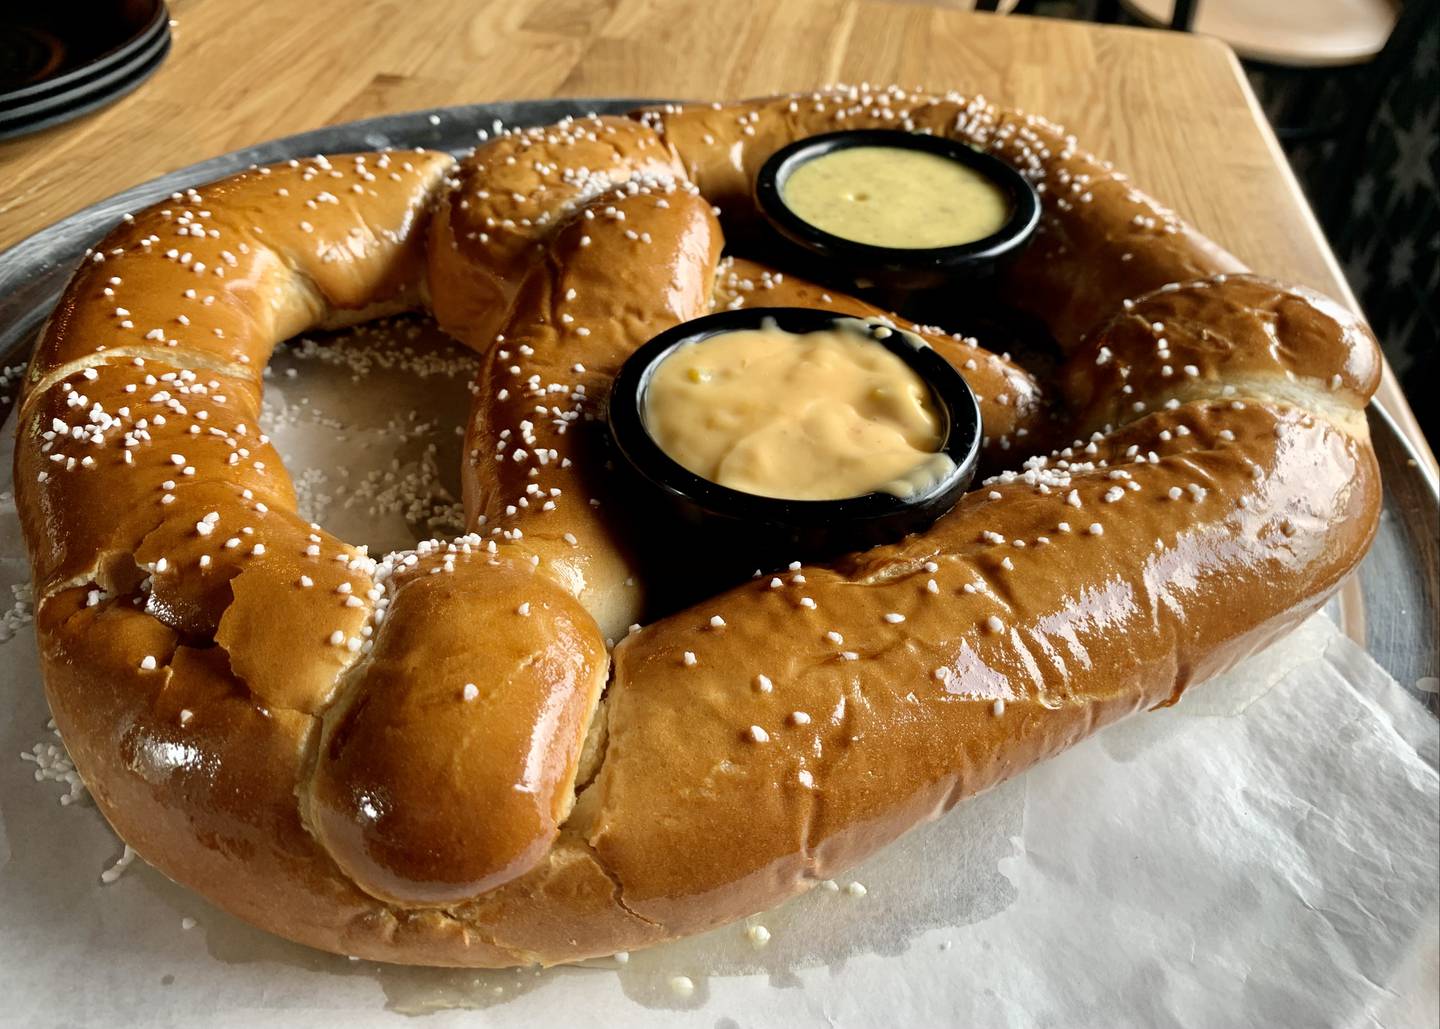 The fresh baked Bavarian pretzel at Dakotas is an appetizer that must be shared. The pretzel is over a foot in diameter and comes with honey mustard and pickled jalapeno cheese sauces.